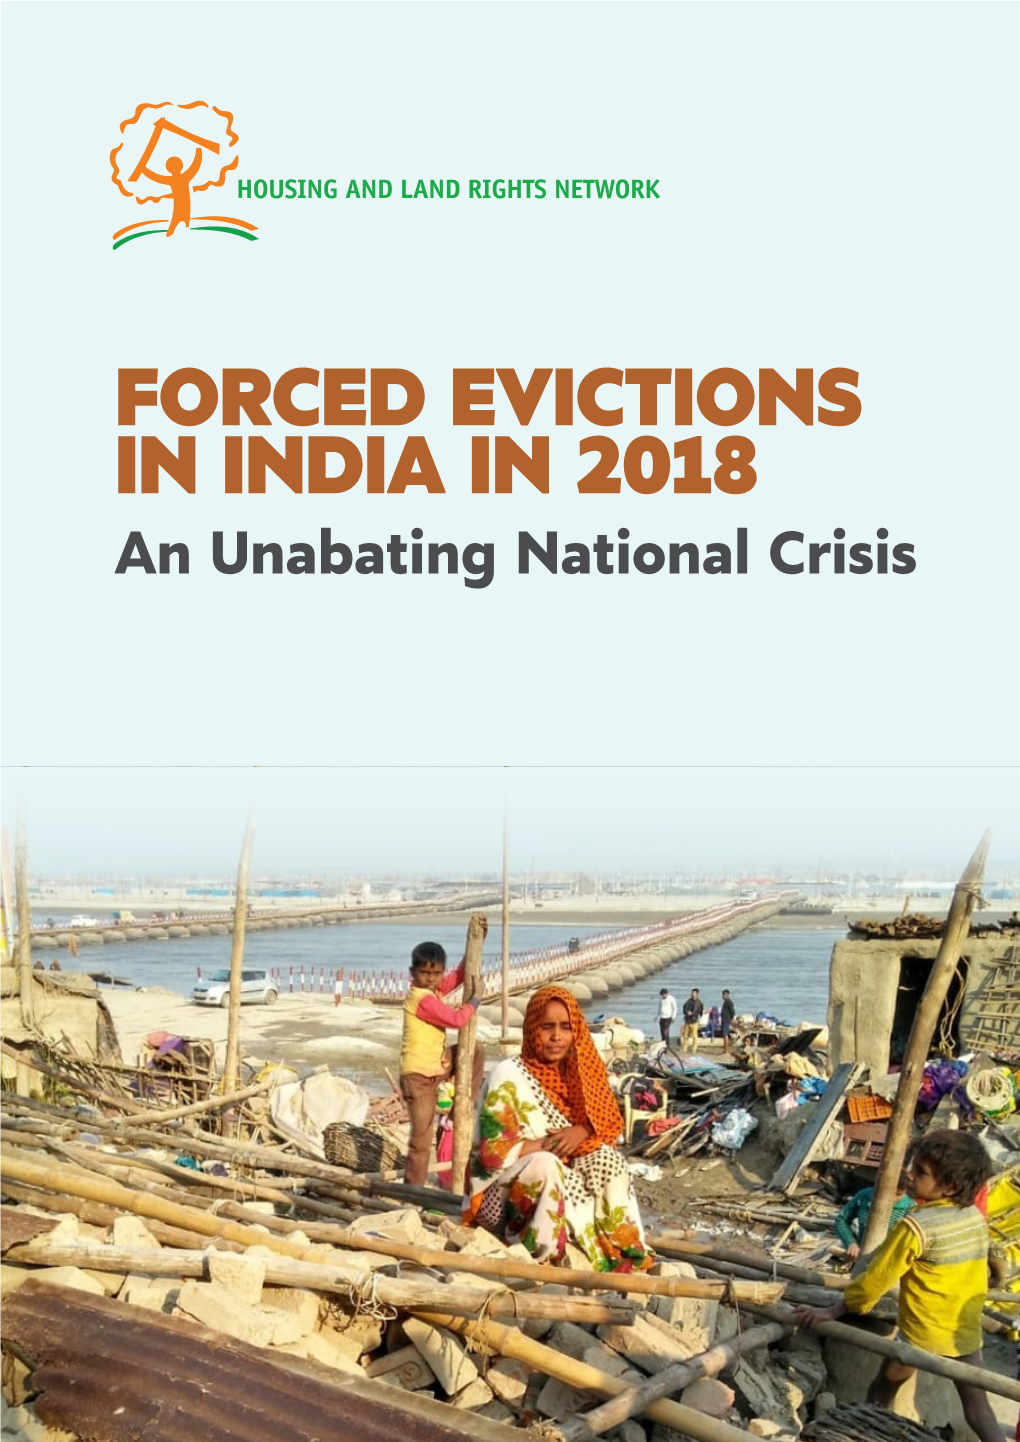 FORCED EVICTIONS in INDIA in 2018 an Unabating National Crisis